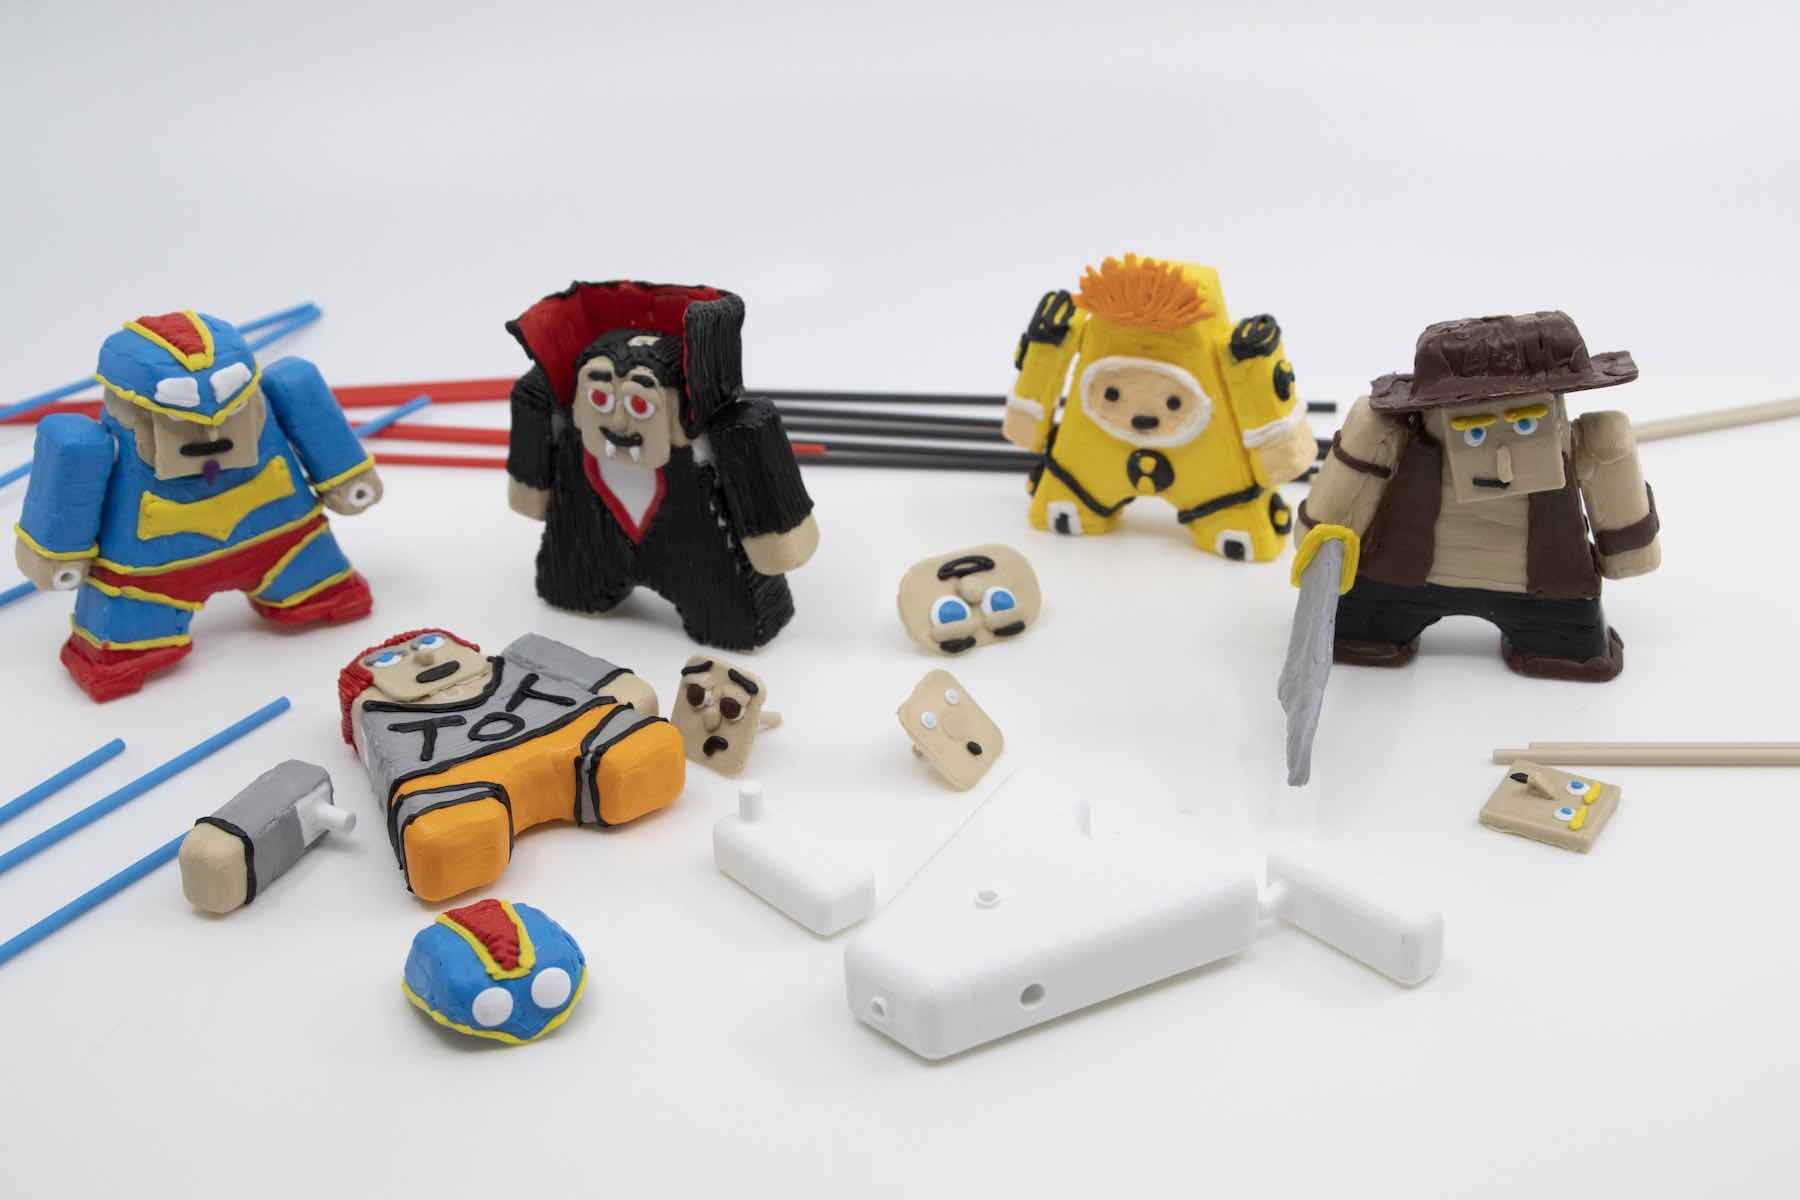 3Doodler's new kits let you build your own action figures - Gearbrain